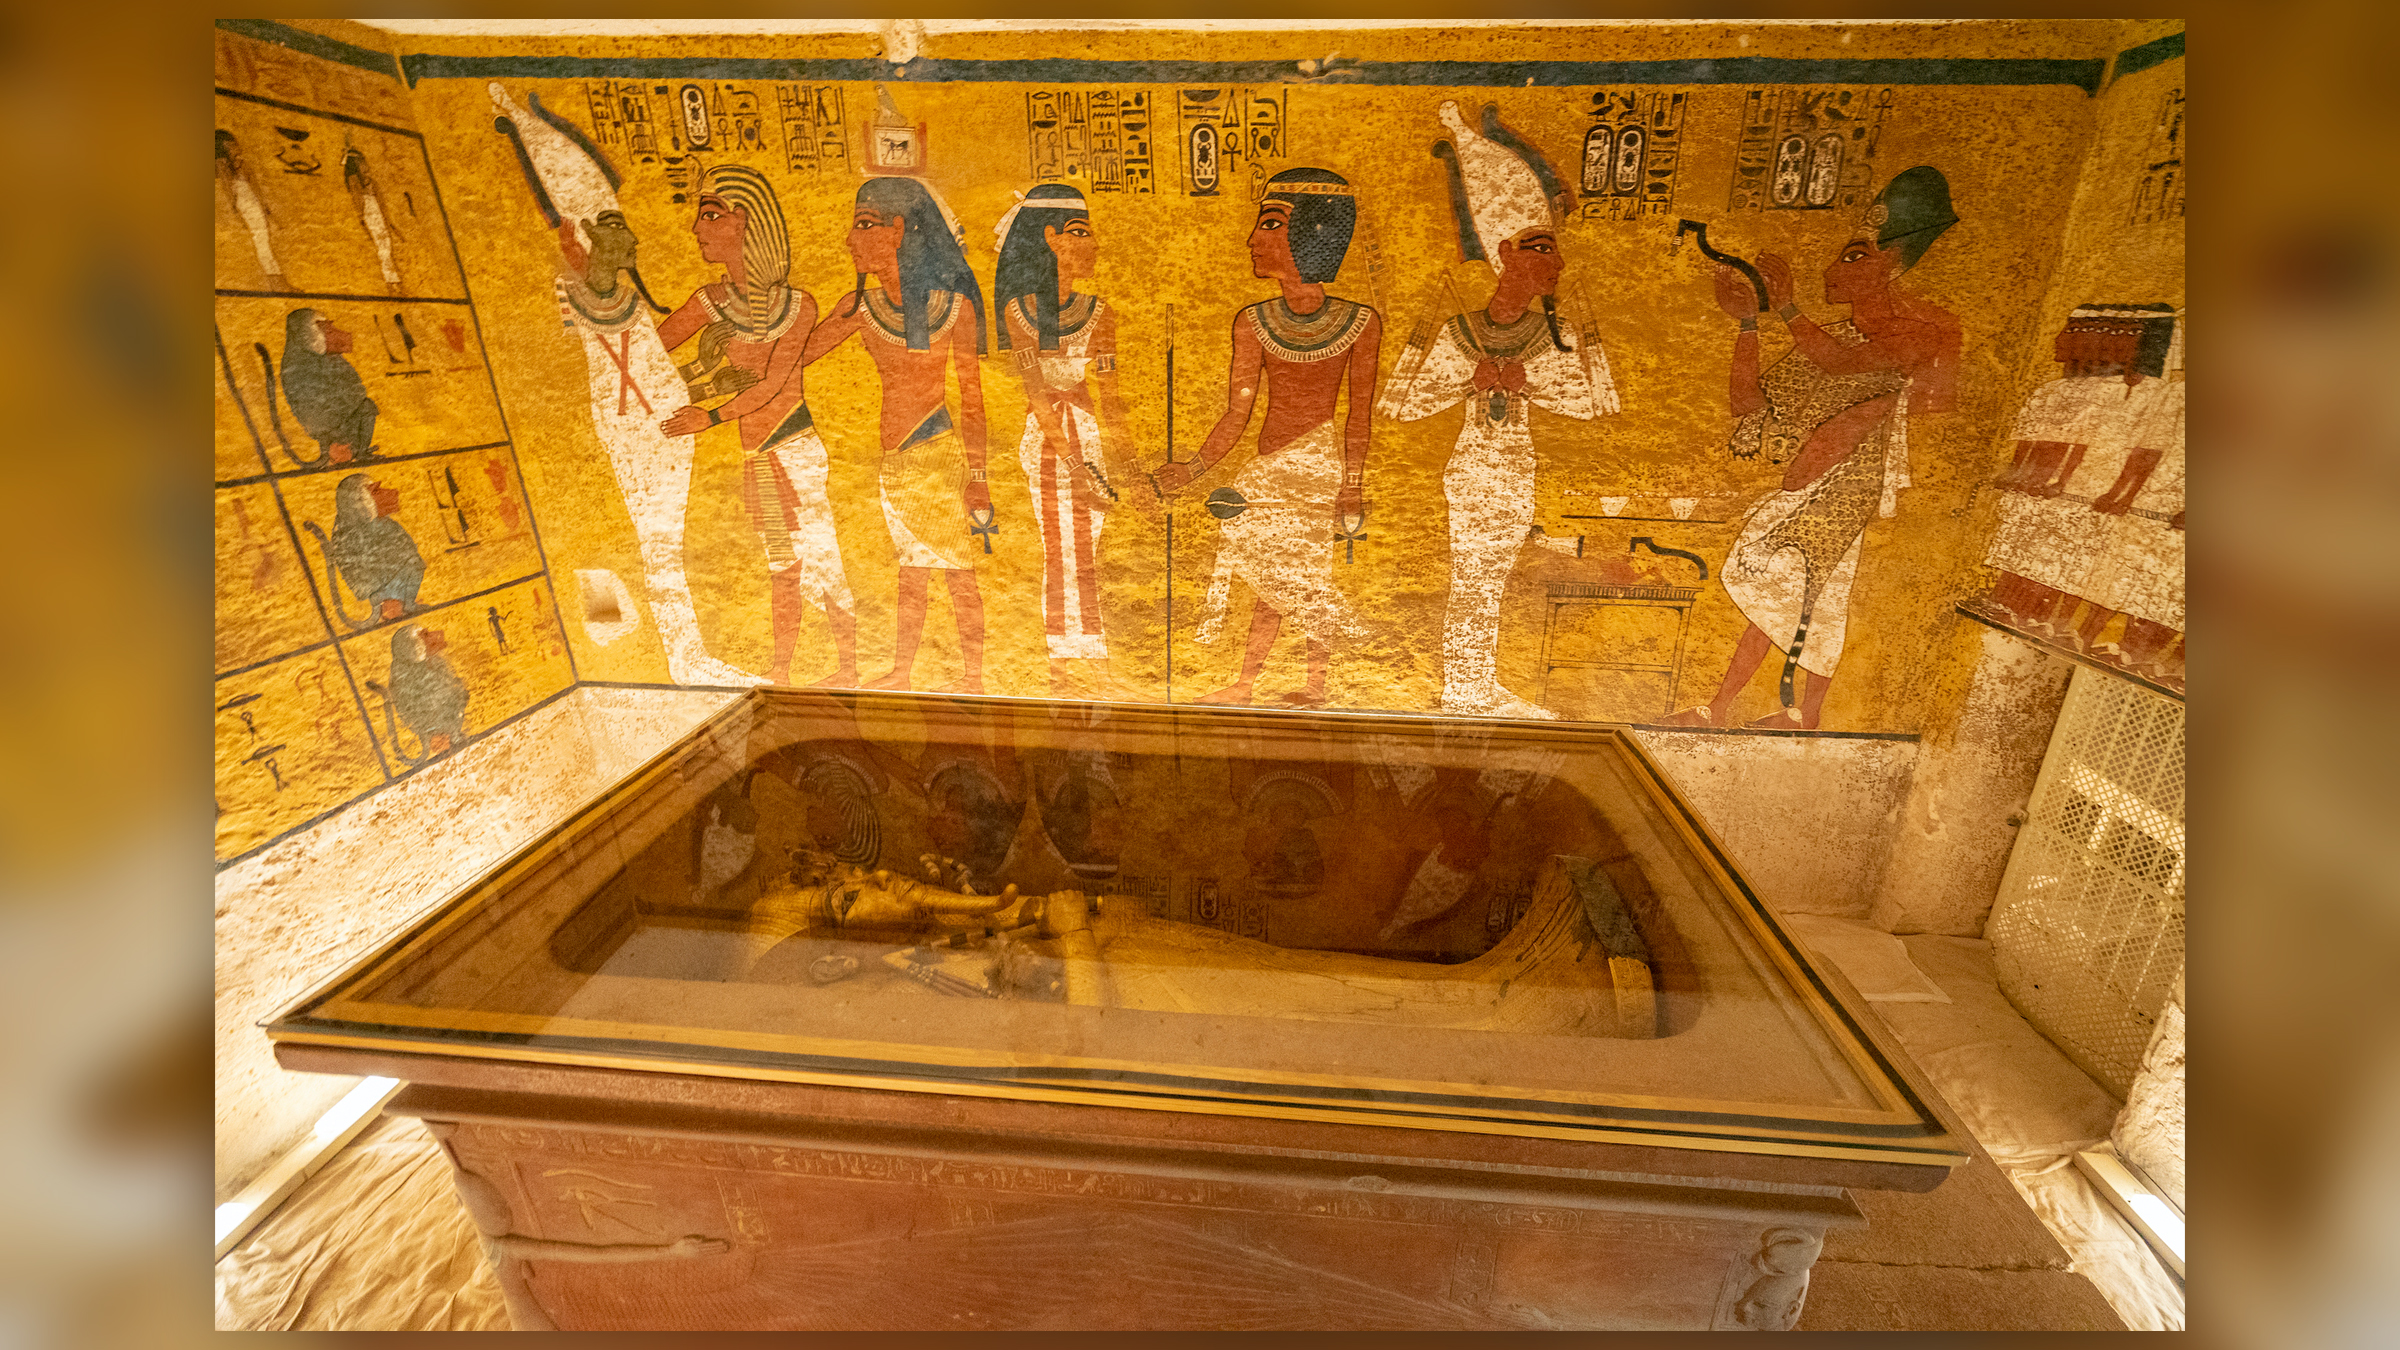 Photograph of the tomb of Pharaoh Tutankhamun in the Valley of the Kings in Luxor. The coffin is placed in the center of the room, with Egyptian paintings on the wall.